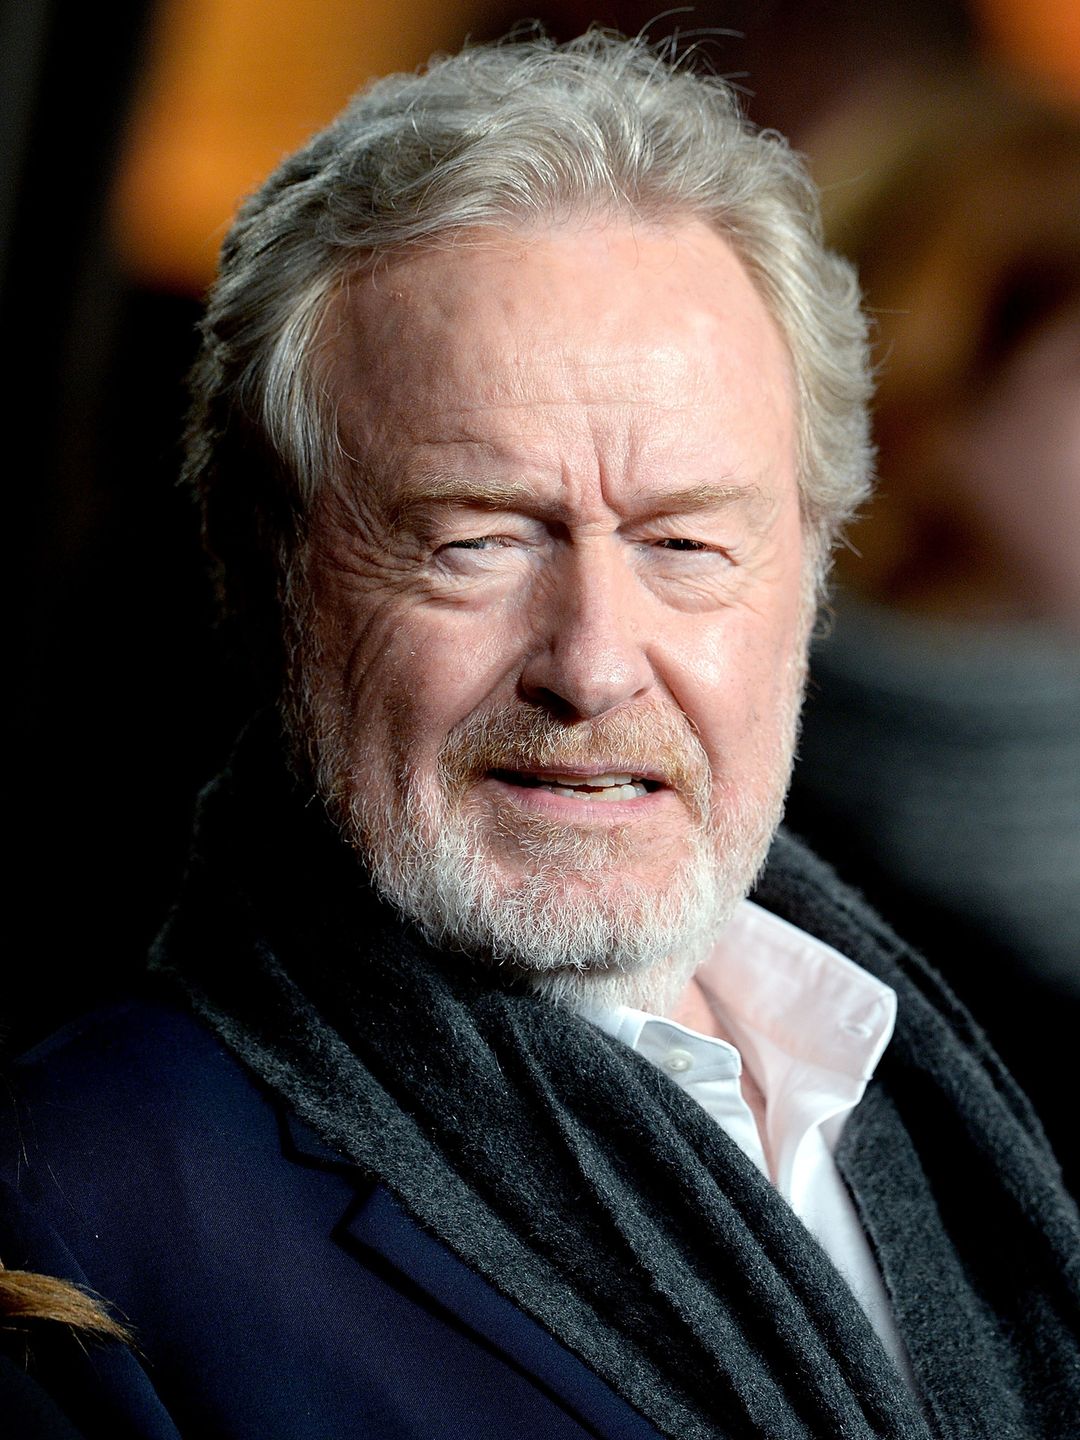 Ridley Scott who is his mother